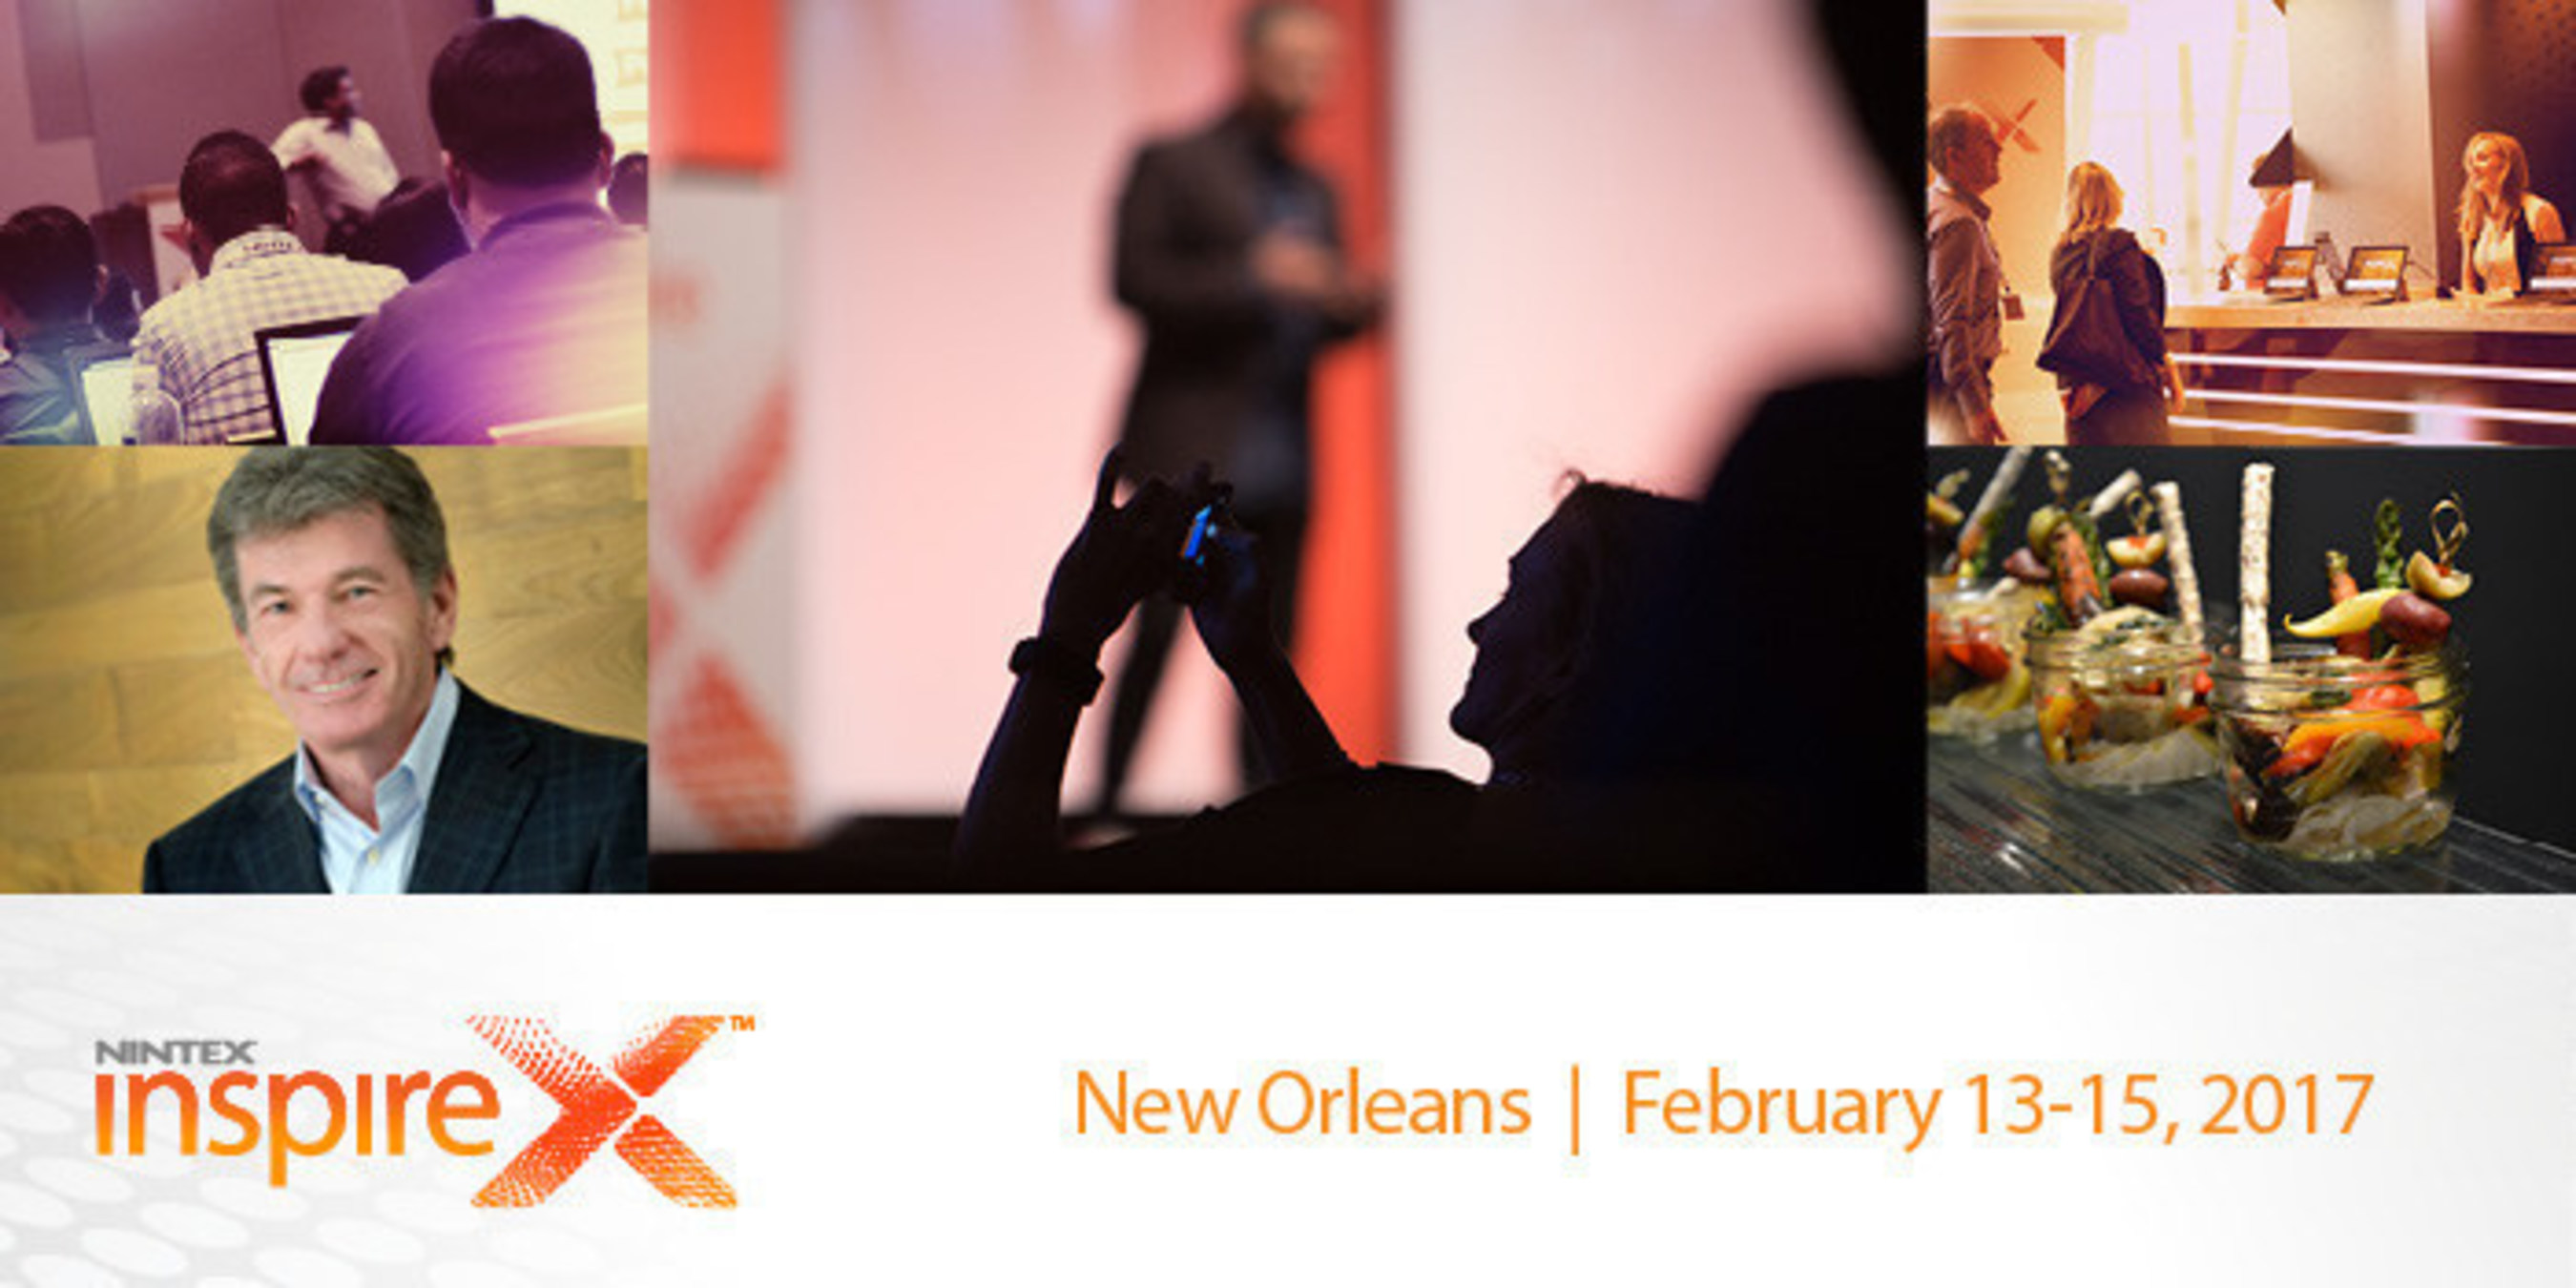 Register now for Nintex InspireX which will be held February 13-15, 2017, in New Orleans at the Sheraton New Orleans Hotel. Early bird pricing of $695 is valid until November 1, 2016. Confirm your attendance at www.nintex.com/inspirex. InspireX is a three-day conference which provides attendees with an opportunity to connect and collaborate with Nintex customers and partners from around the globe. Attendees will gain new knowledge about how to solve process and document generation challenges and see first-hand how Nintex technology can improve how they work.